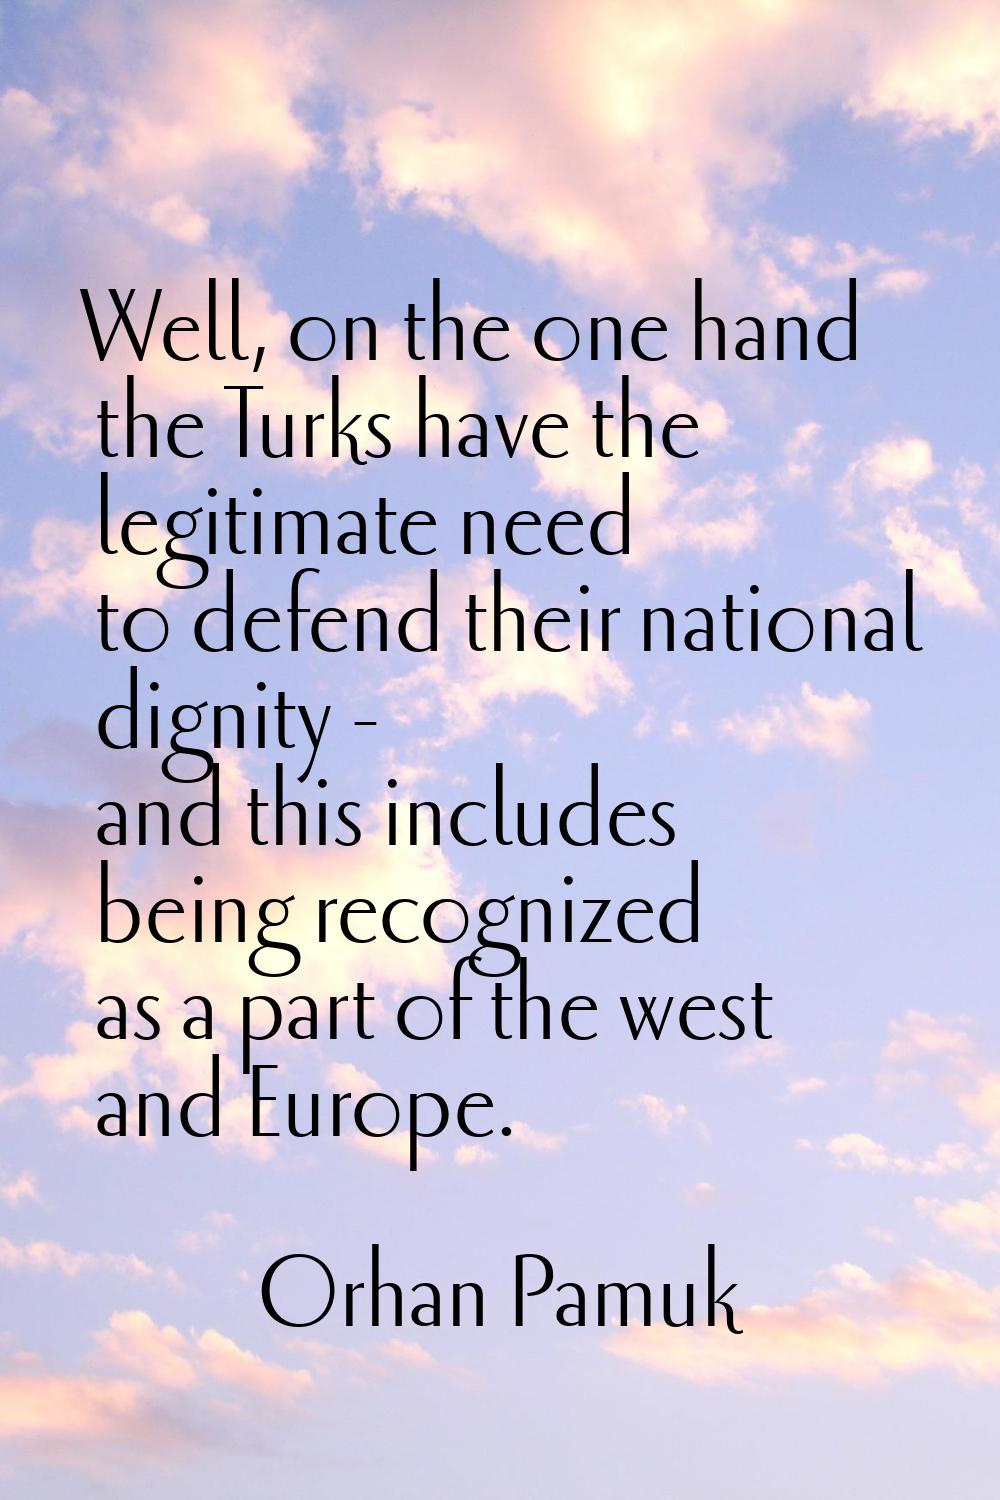 Well, on the one hand the Turks have the legitimate need to defend their national dignity - and thi